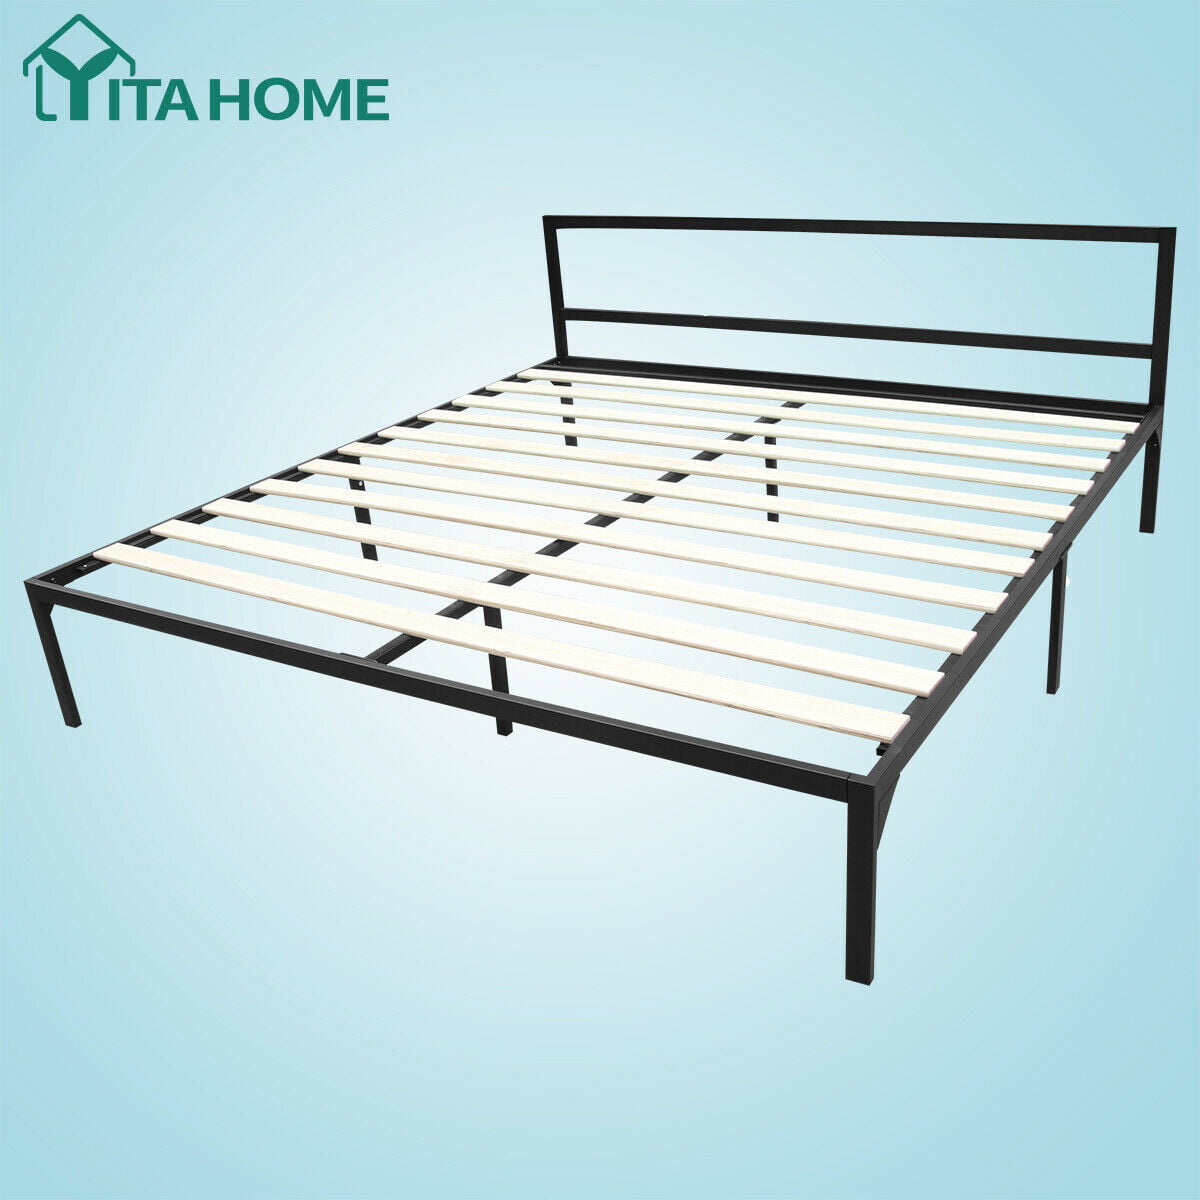 Yitahome King Size Metal Platform Bed, King Bed Foundation